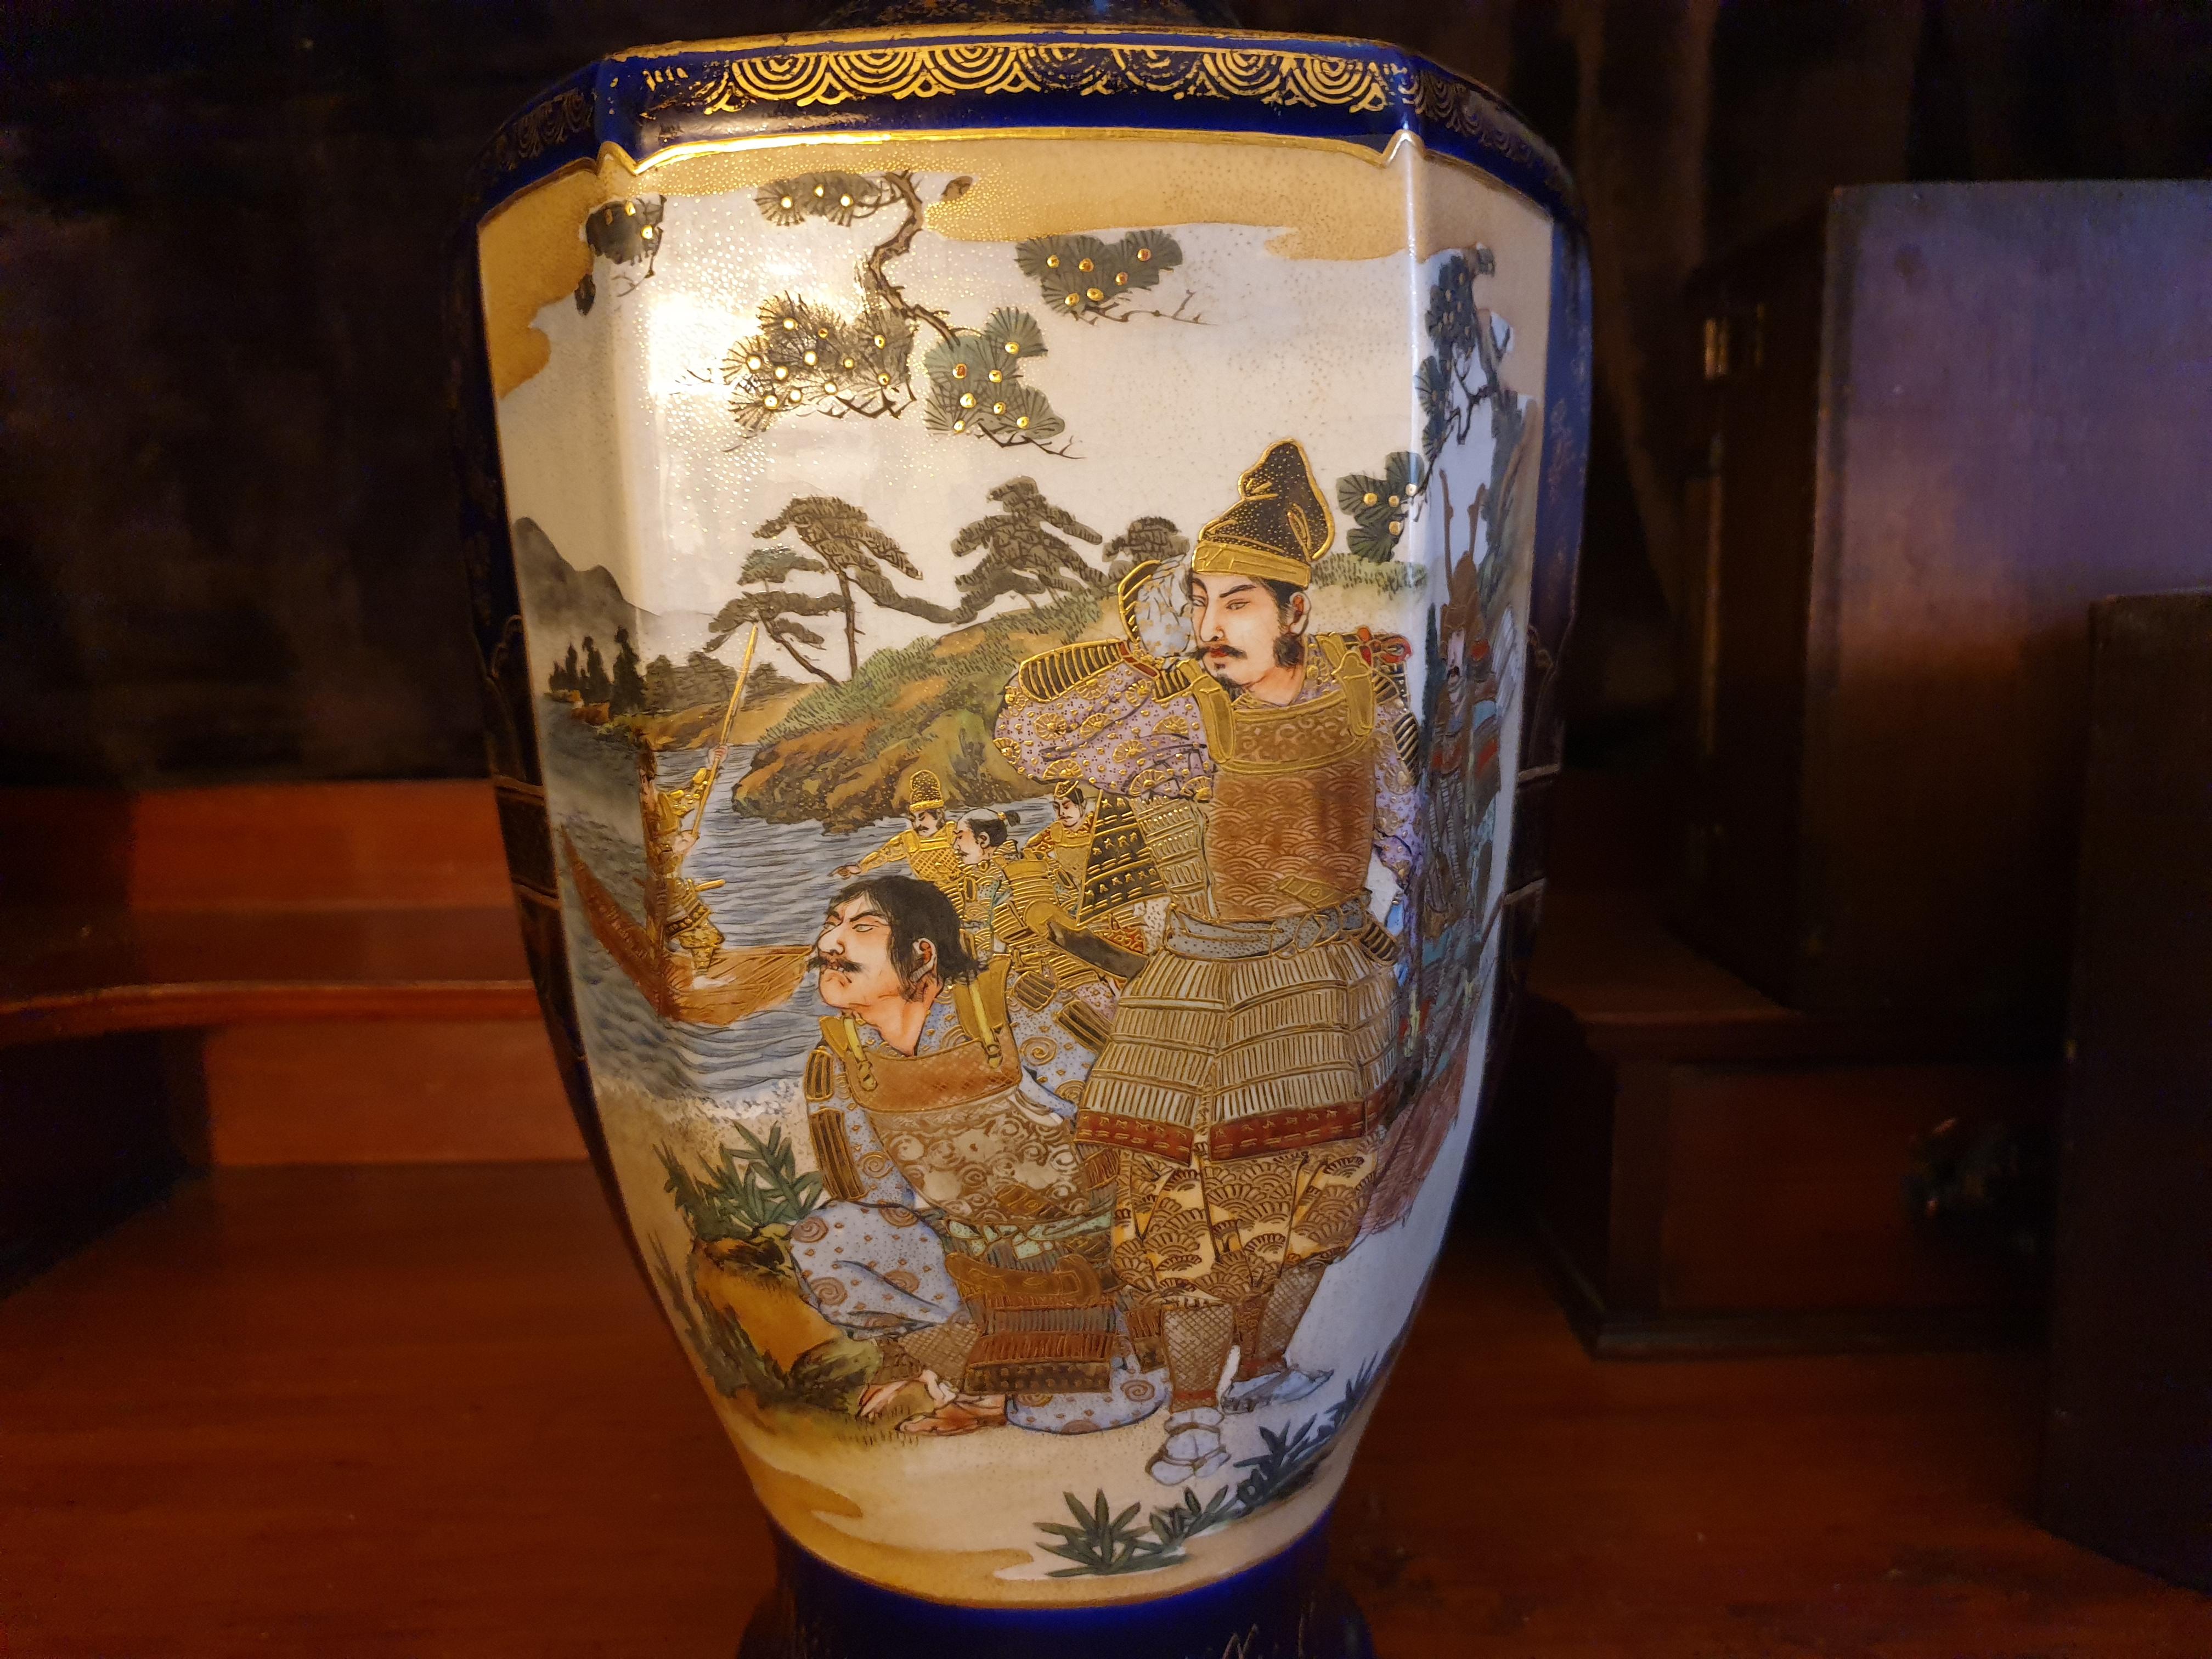 Meiji Period Pair of Japanese Satsuma Vases 19th Century With Imperial Scenes  For Sale 4